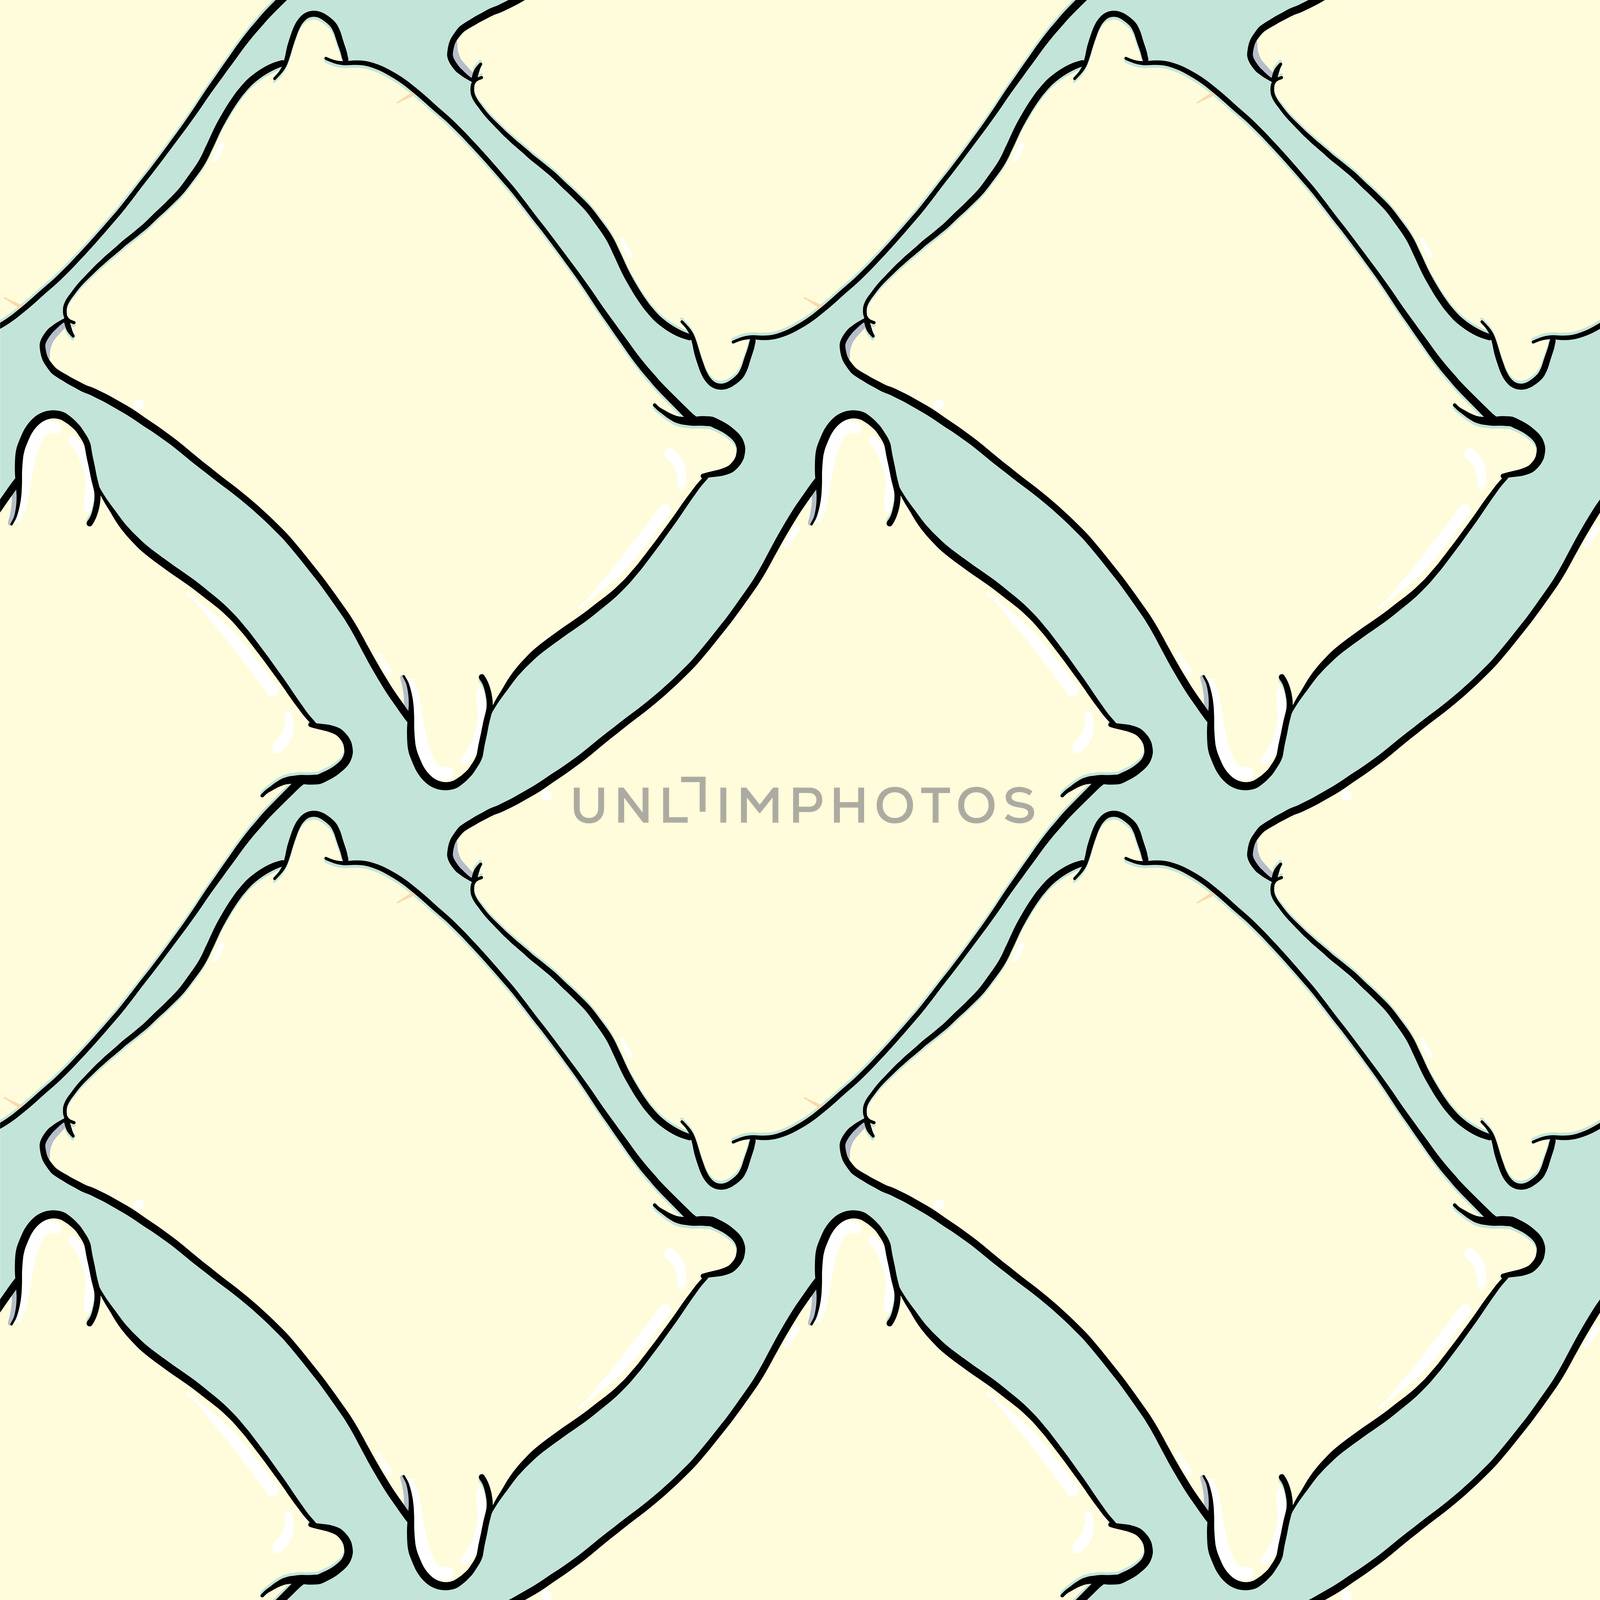 Pillows pattern , illustration, vector on white background